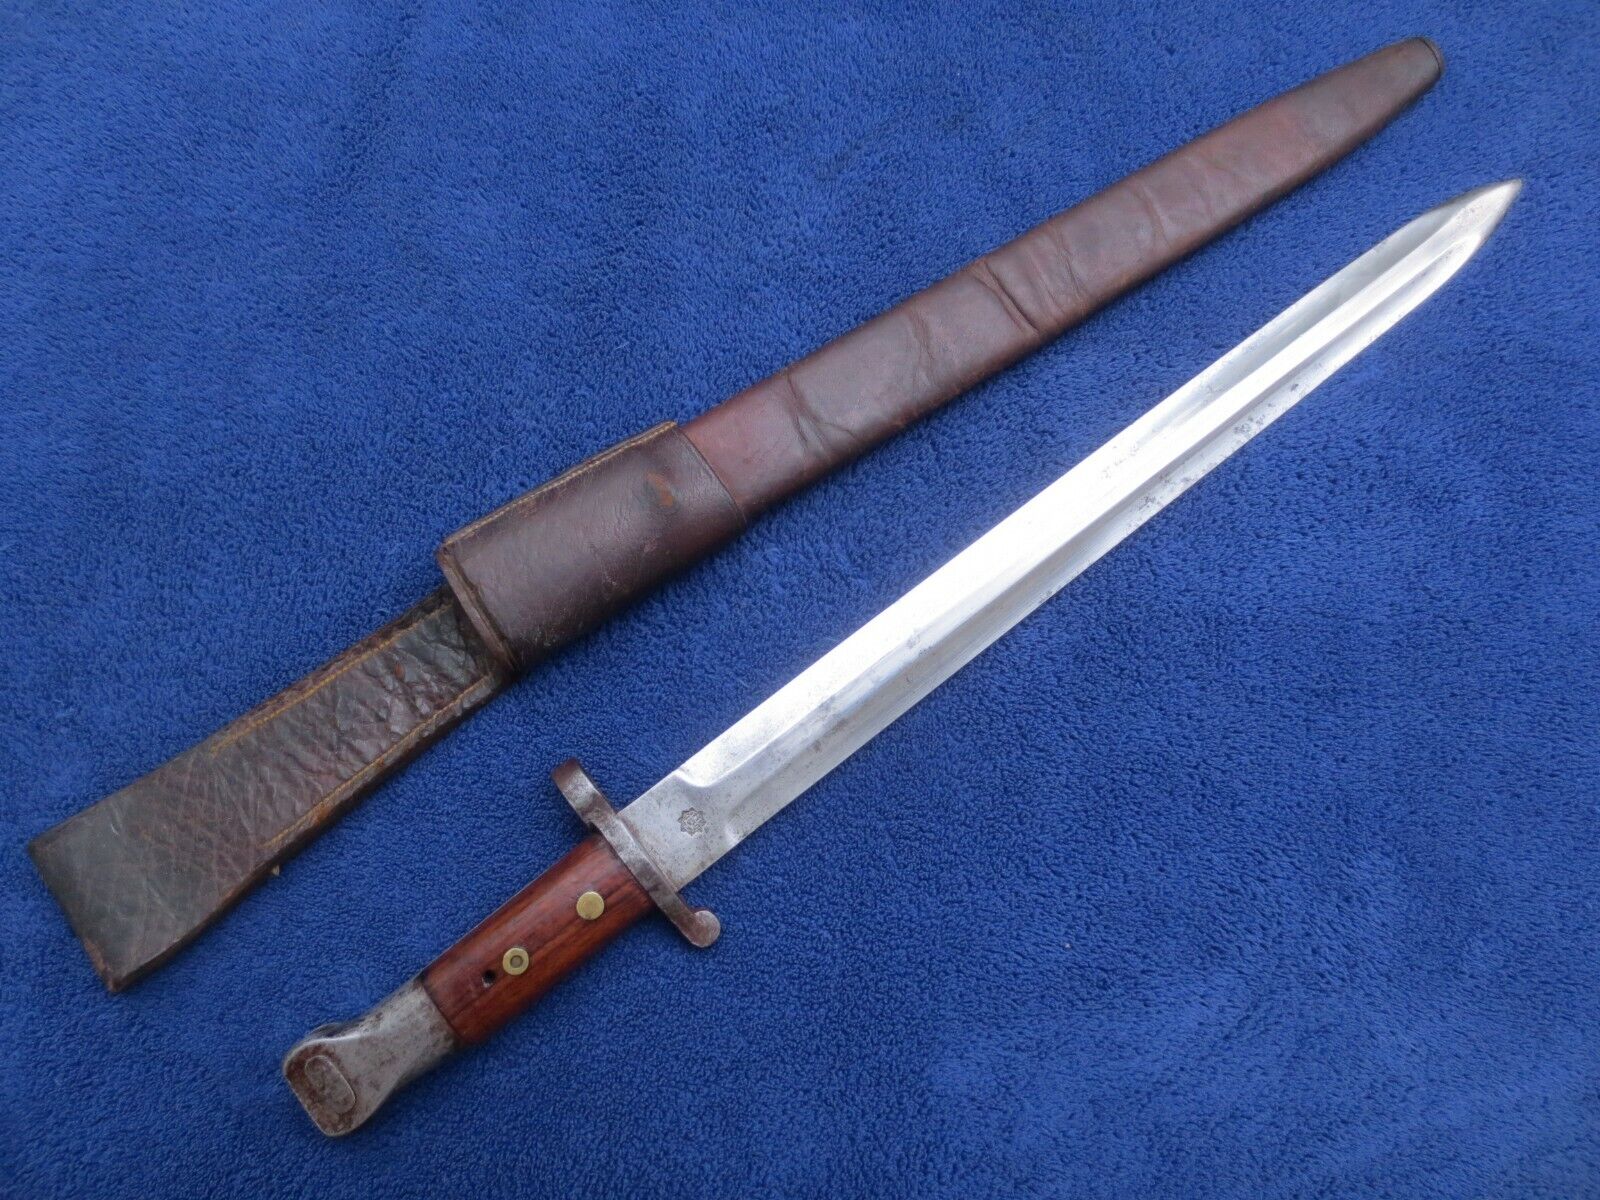 VERY RARE ORIGINAL AFGHANISTAN BRITISH MODEL BAYONET AND SCABBARD WITH FROG